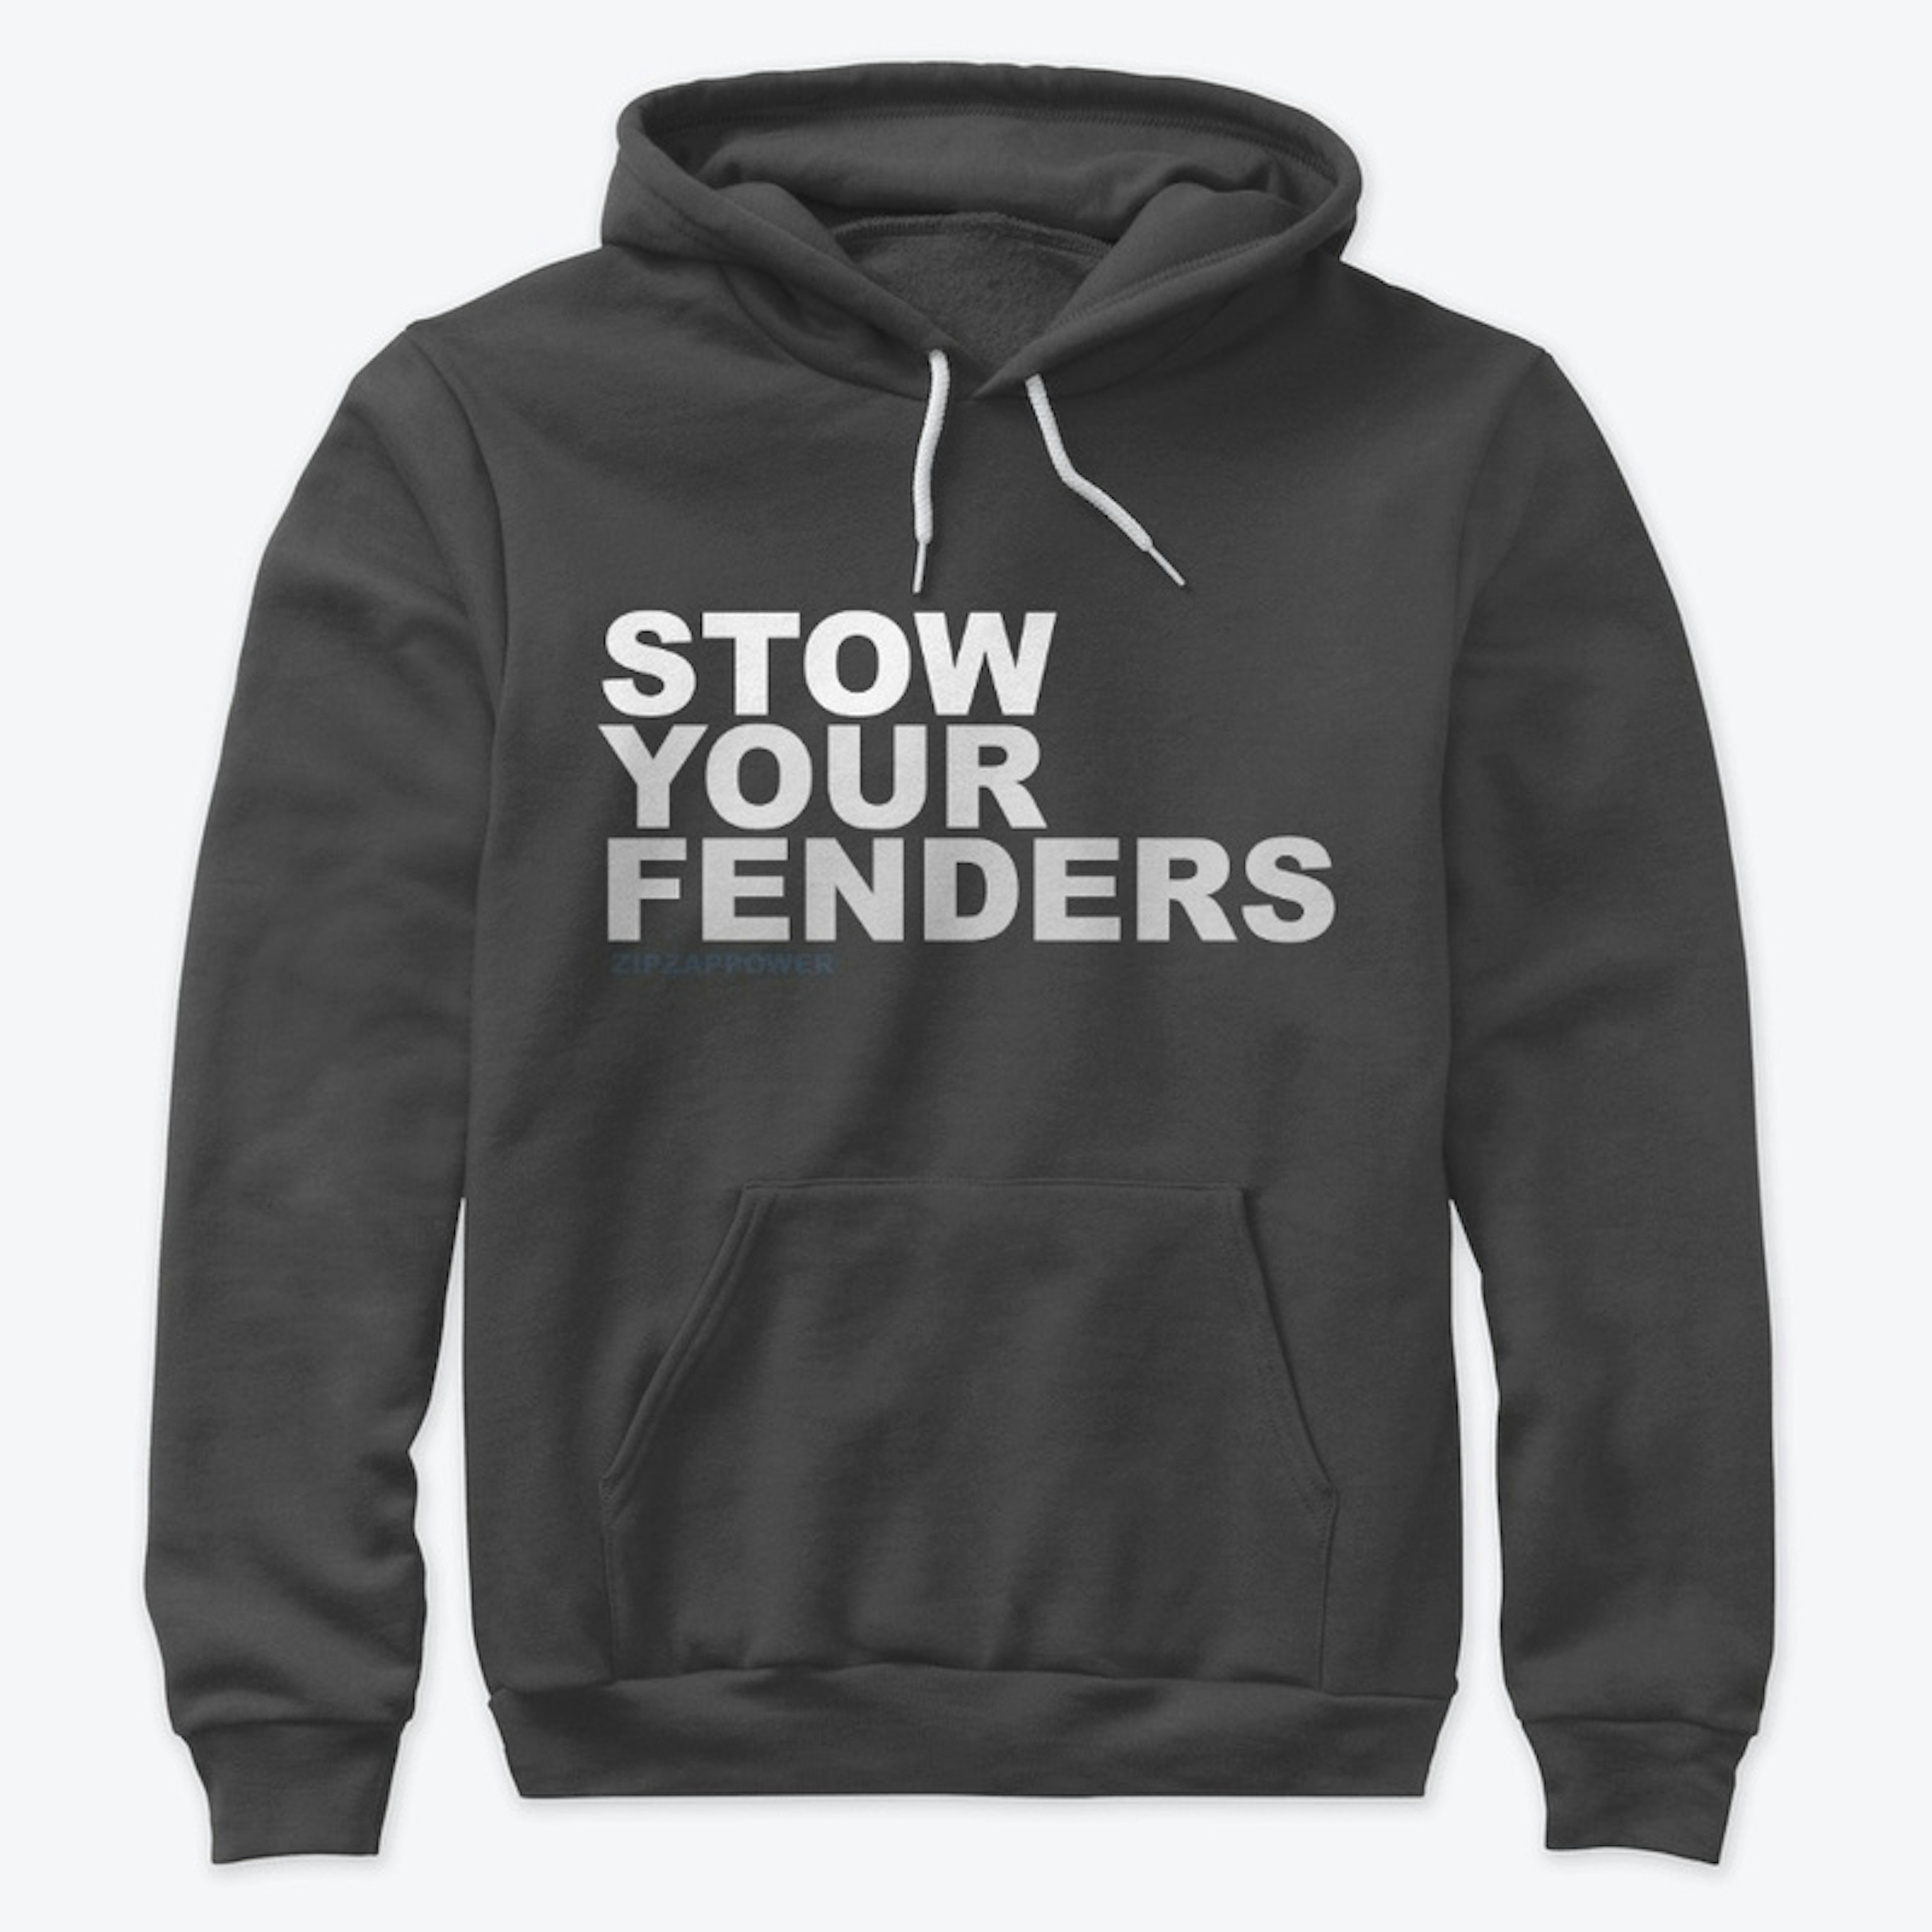 Stow Your Fenders